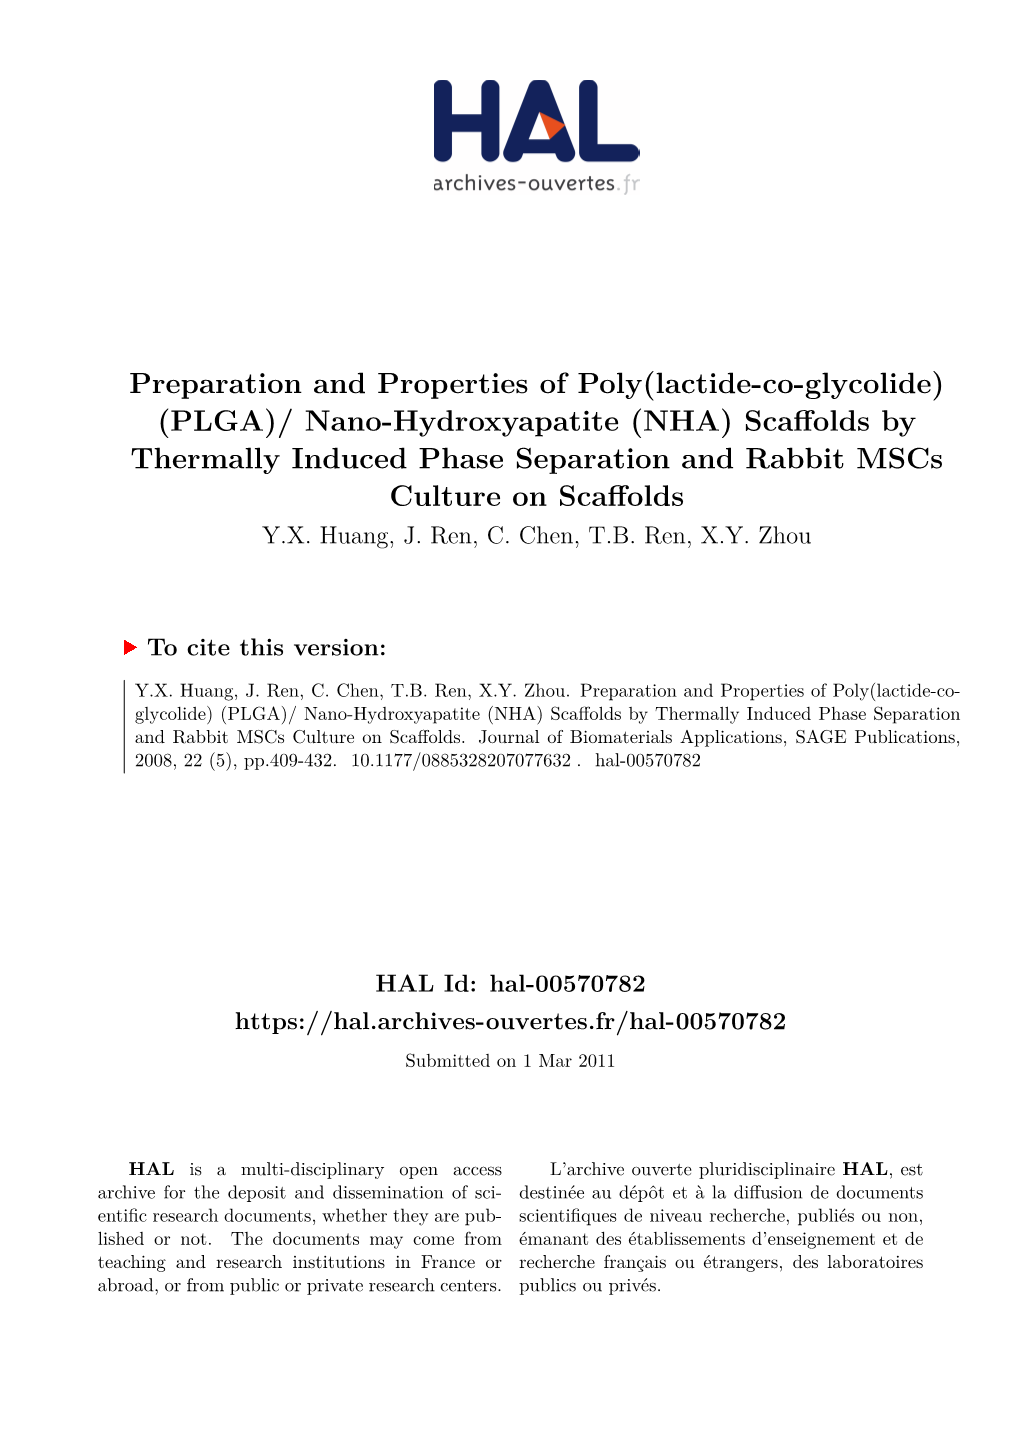 Preparation and Properties of Poly(Lactide-Co-Glycolide) (PLGA